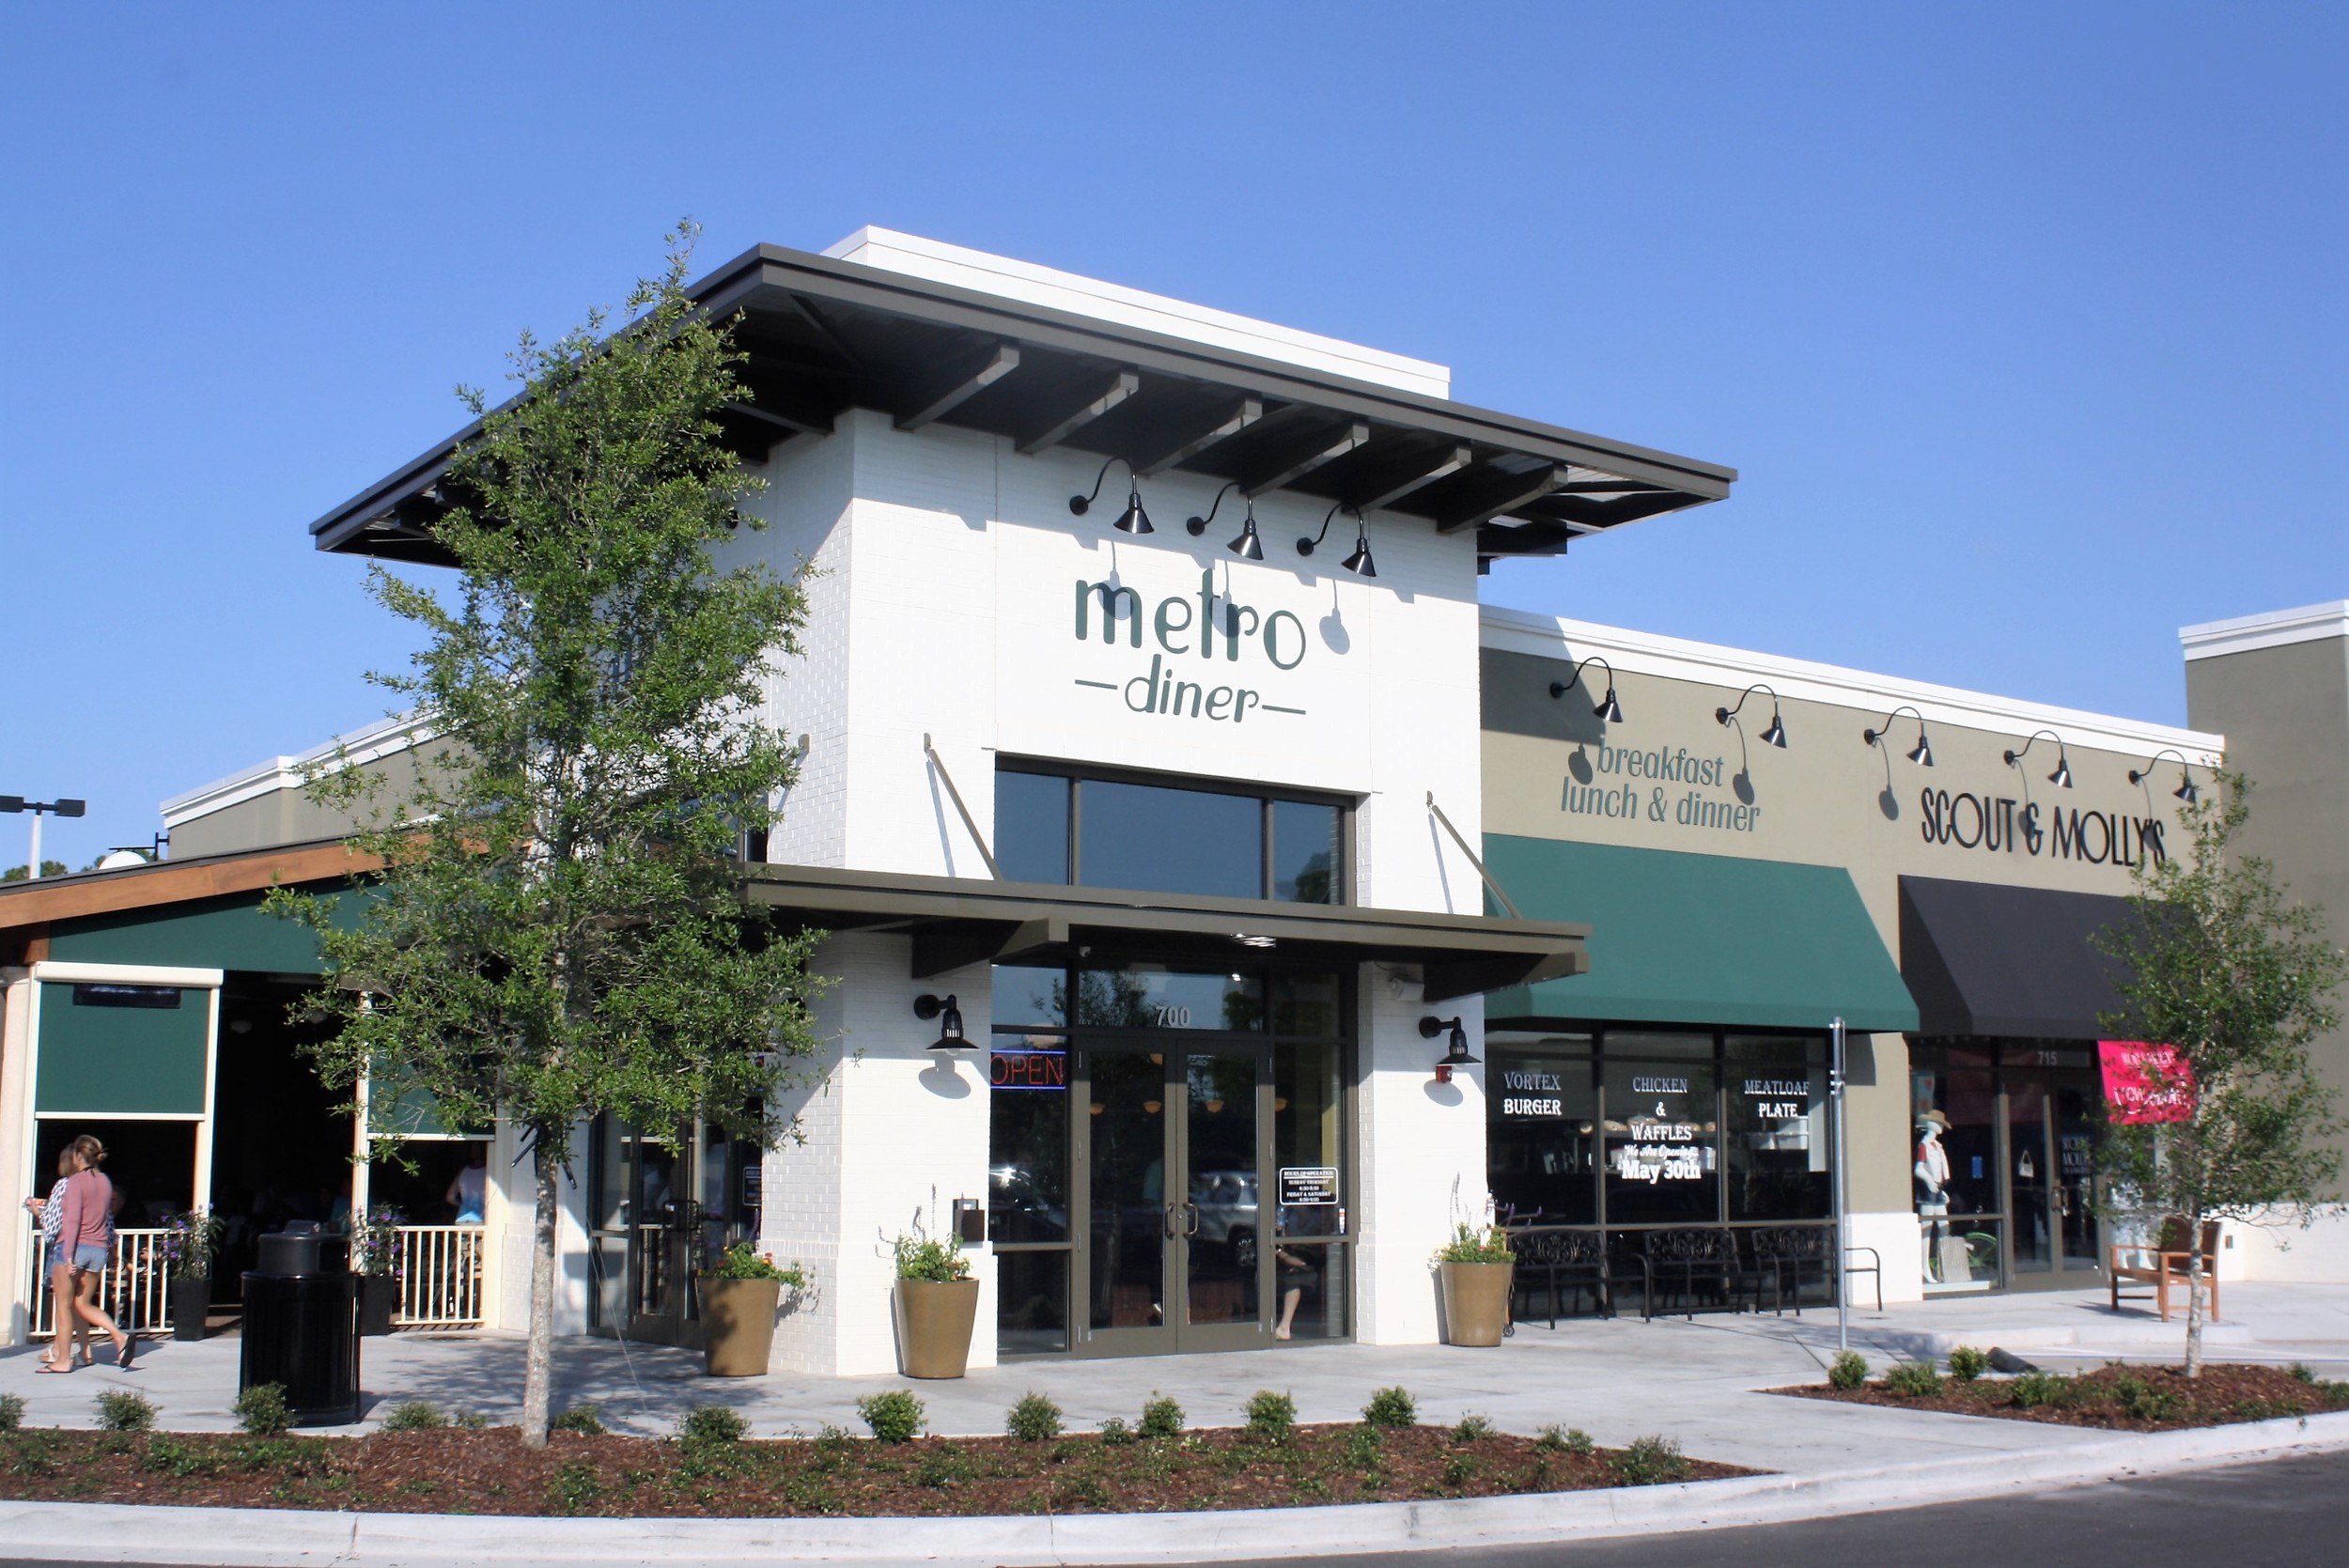 The popular Metro Diner is the newest restaurant to open in Sawgrass Village.